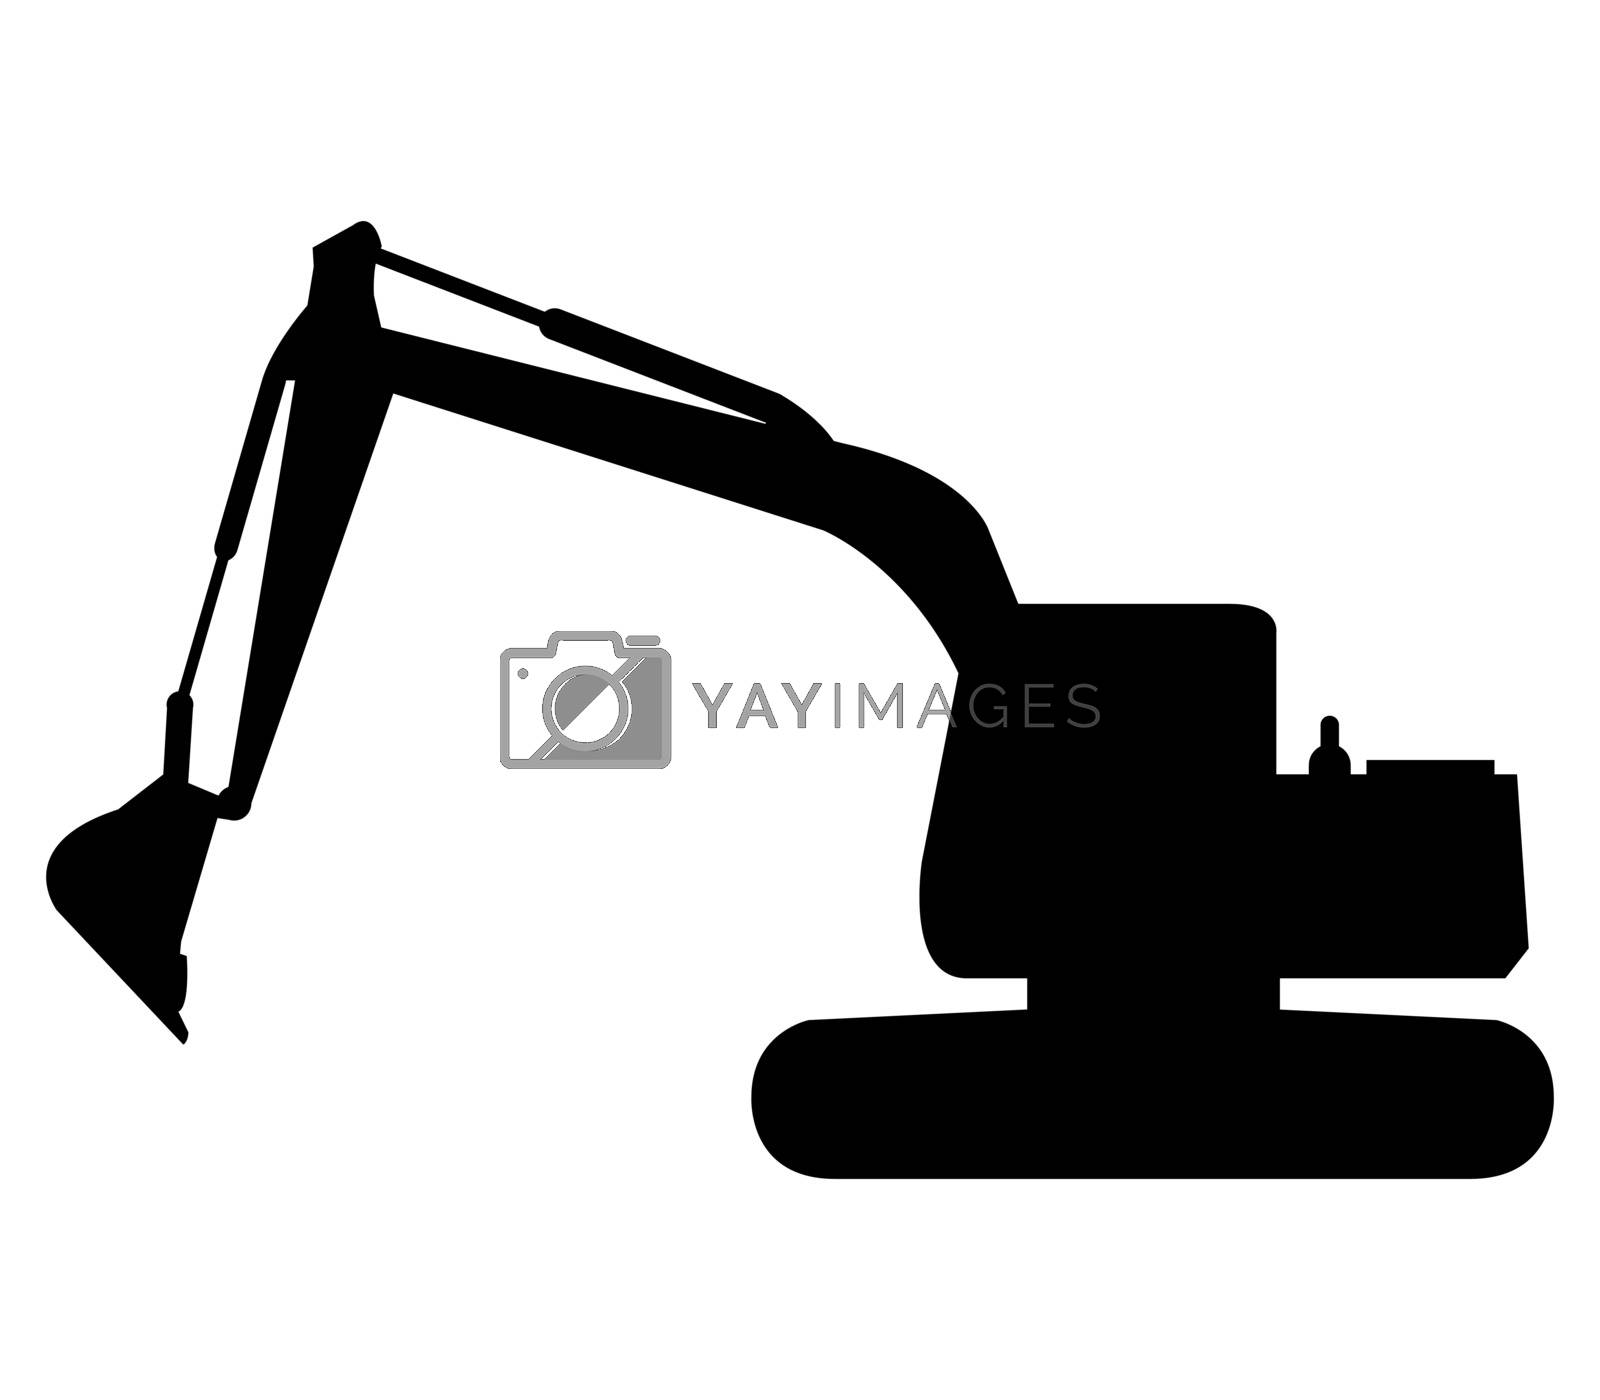 Royalty free image of excavator icon by Mark1987